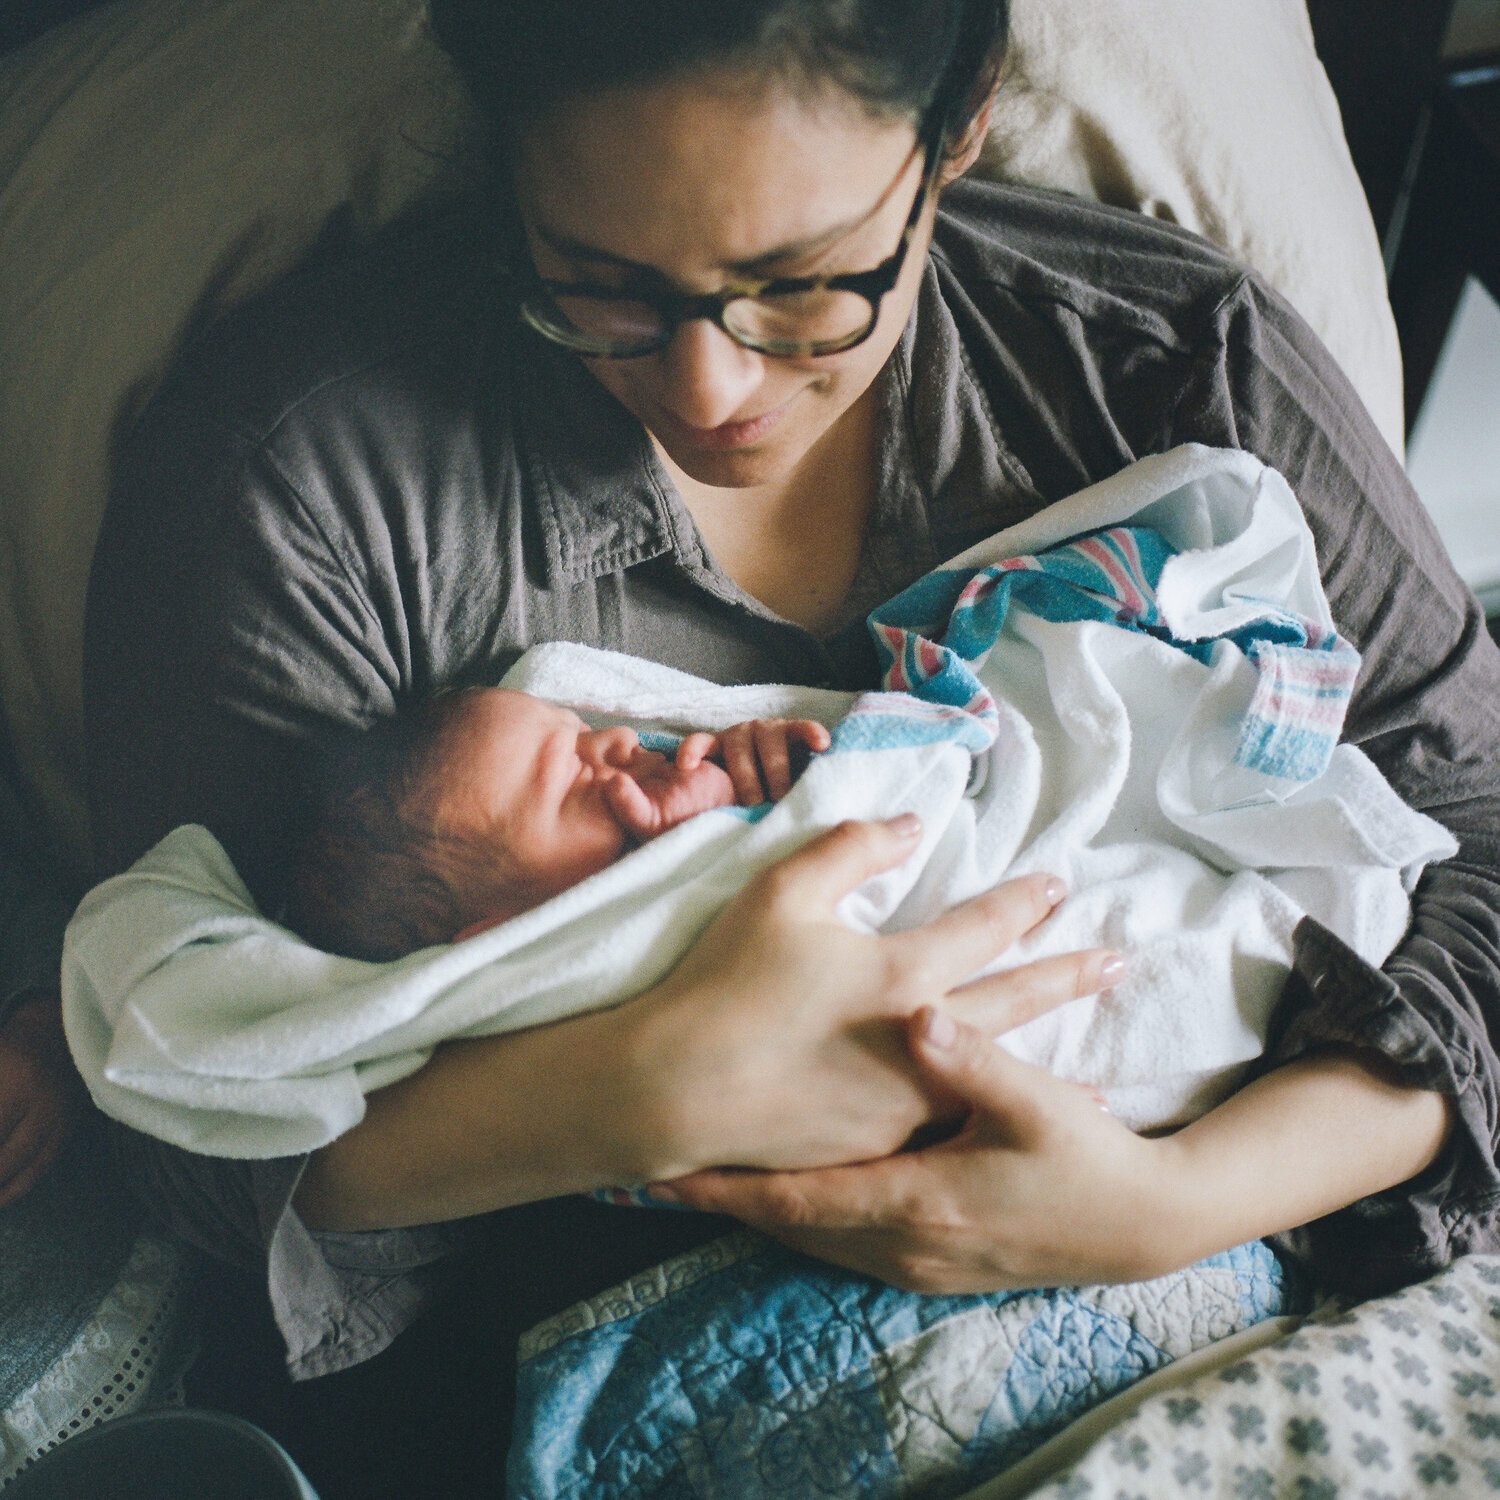 My experience planning a home VBAC with a gestational diabetes diagnosis